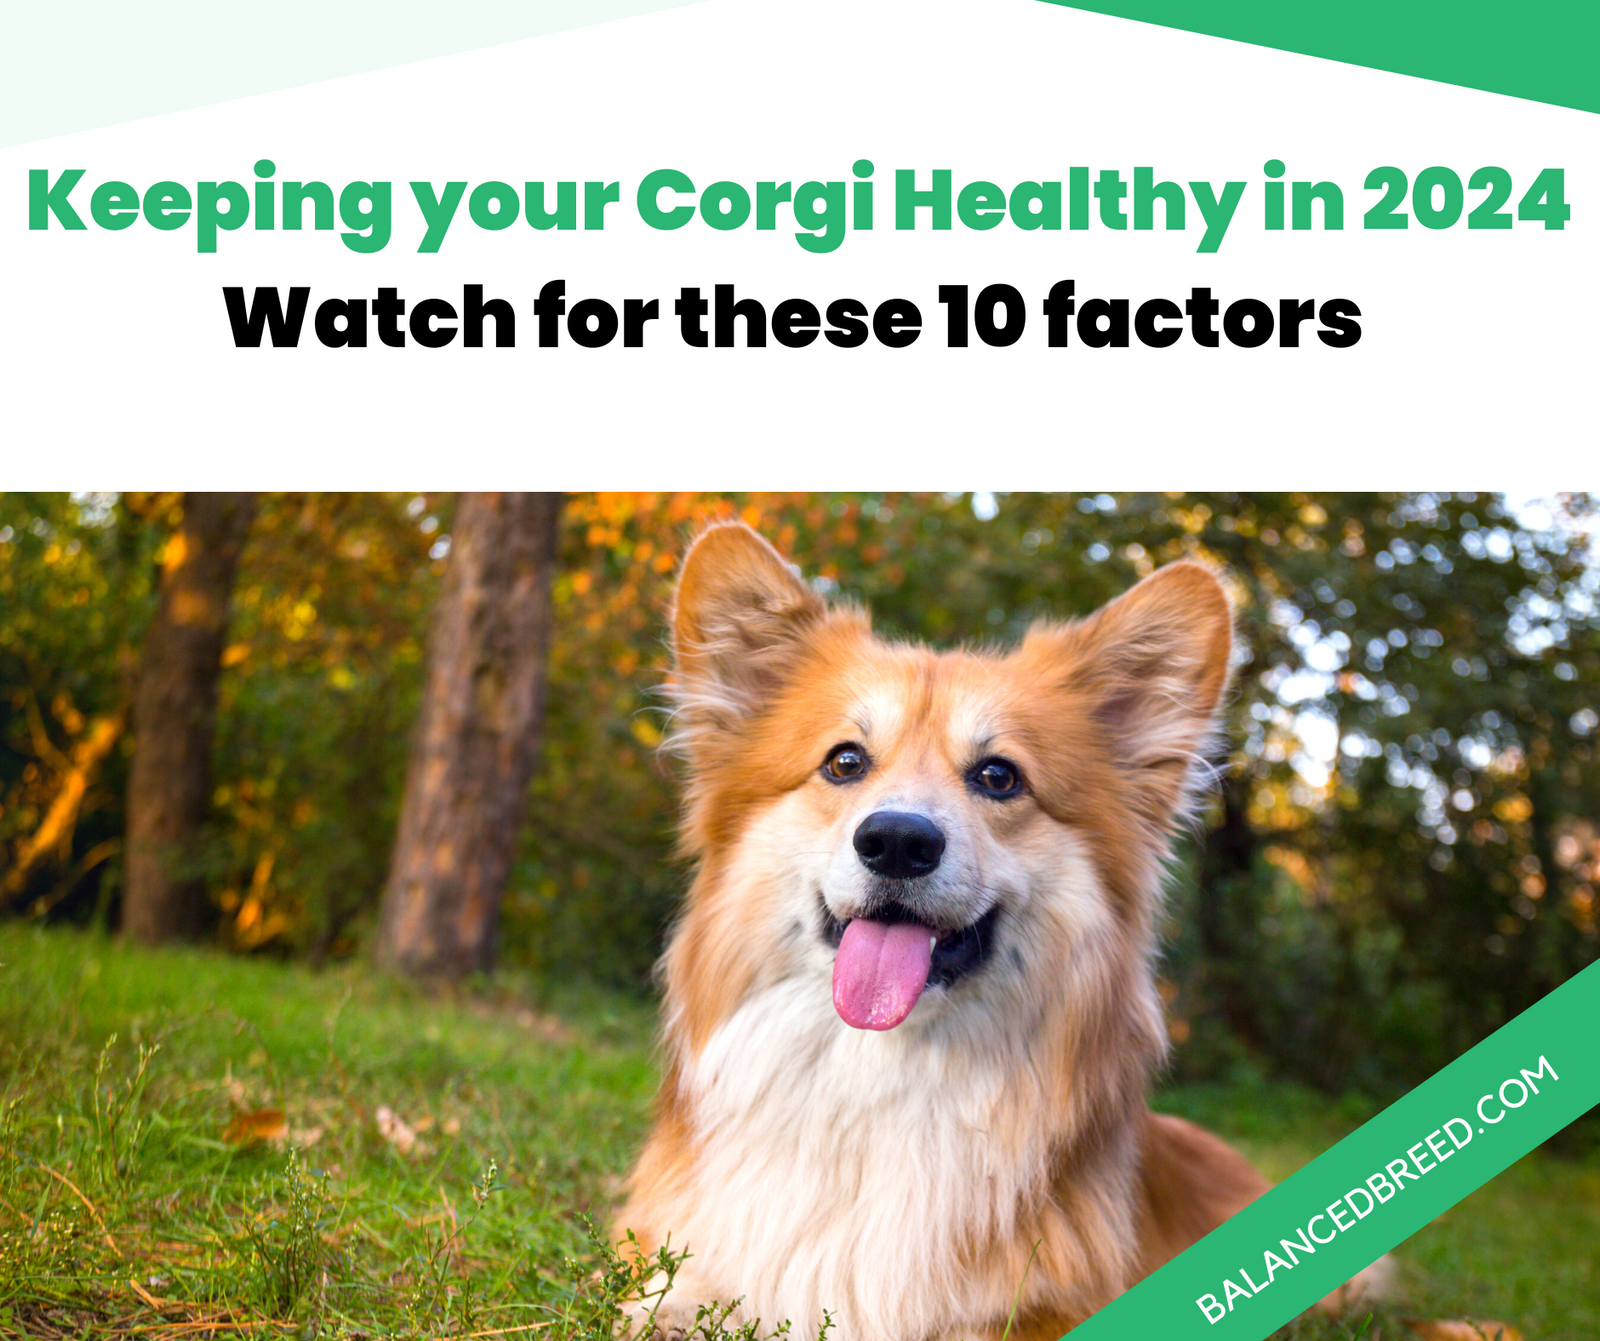 Best health tips for your corgi in 2024